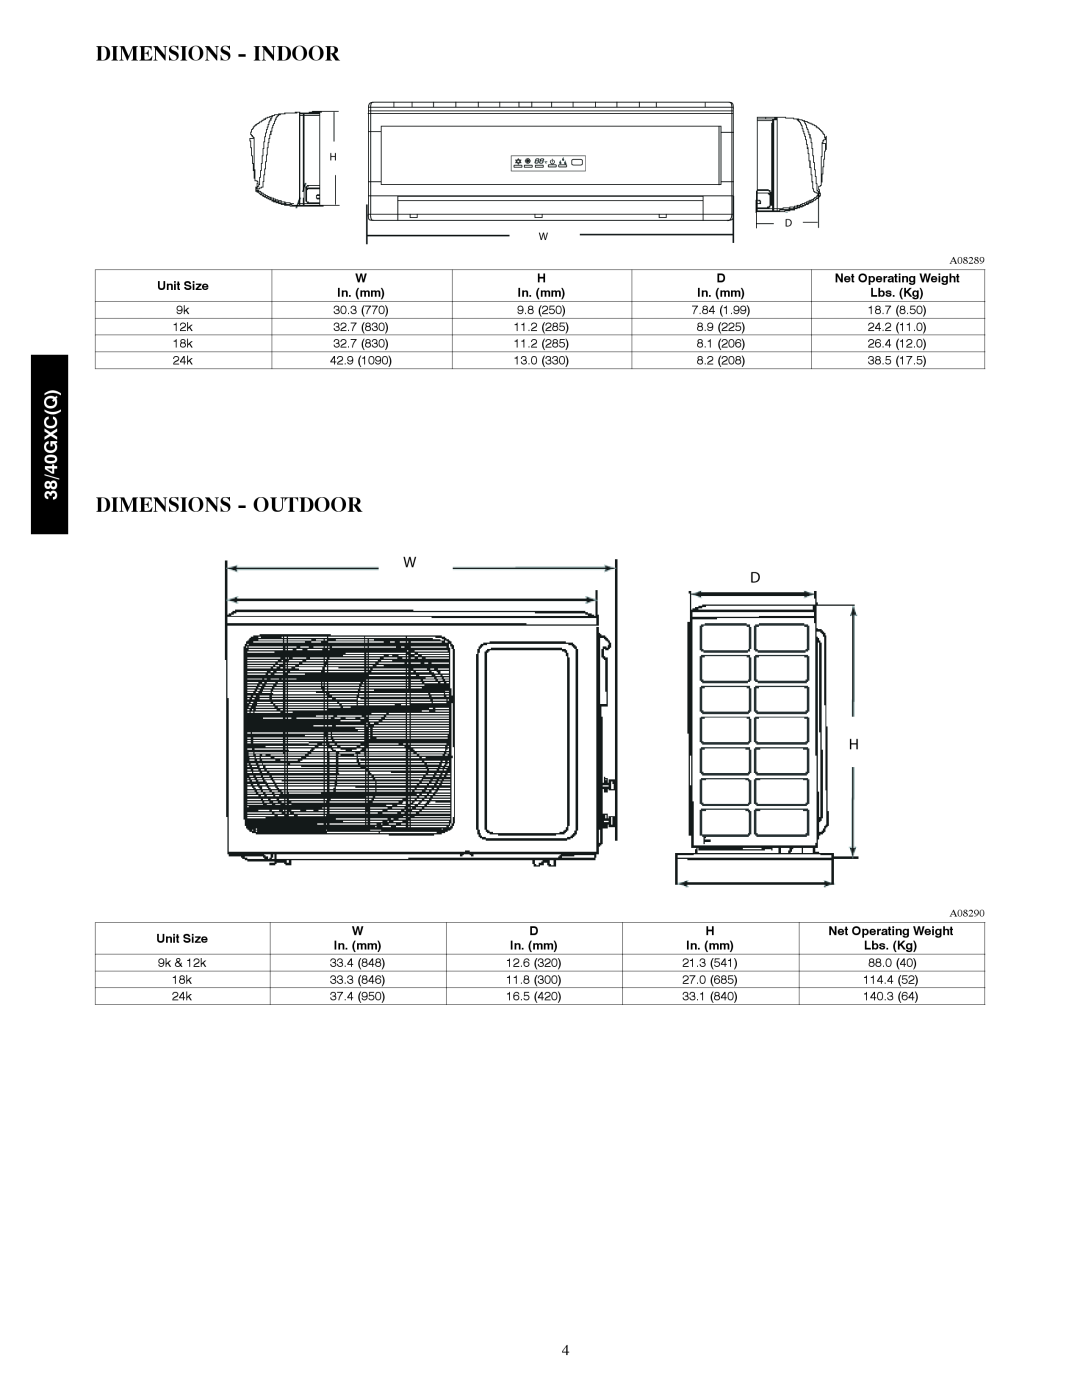 Carrier 40GXQ, 38GXQ, 38GXC installation instructions Dimensions - Indoor, Dimensions - Outdoor, W D H, 38/40GXCQ 